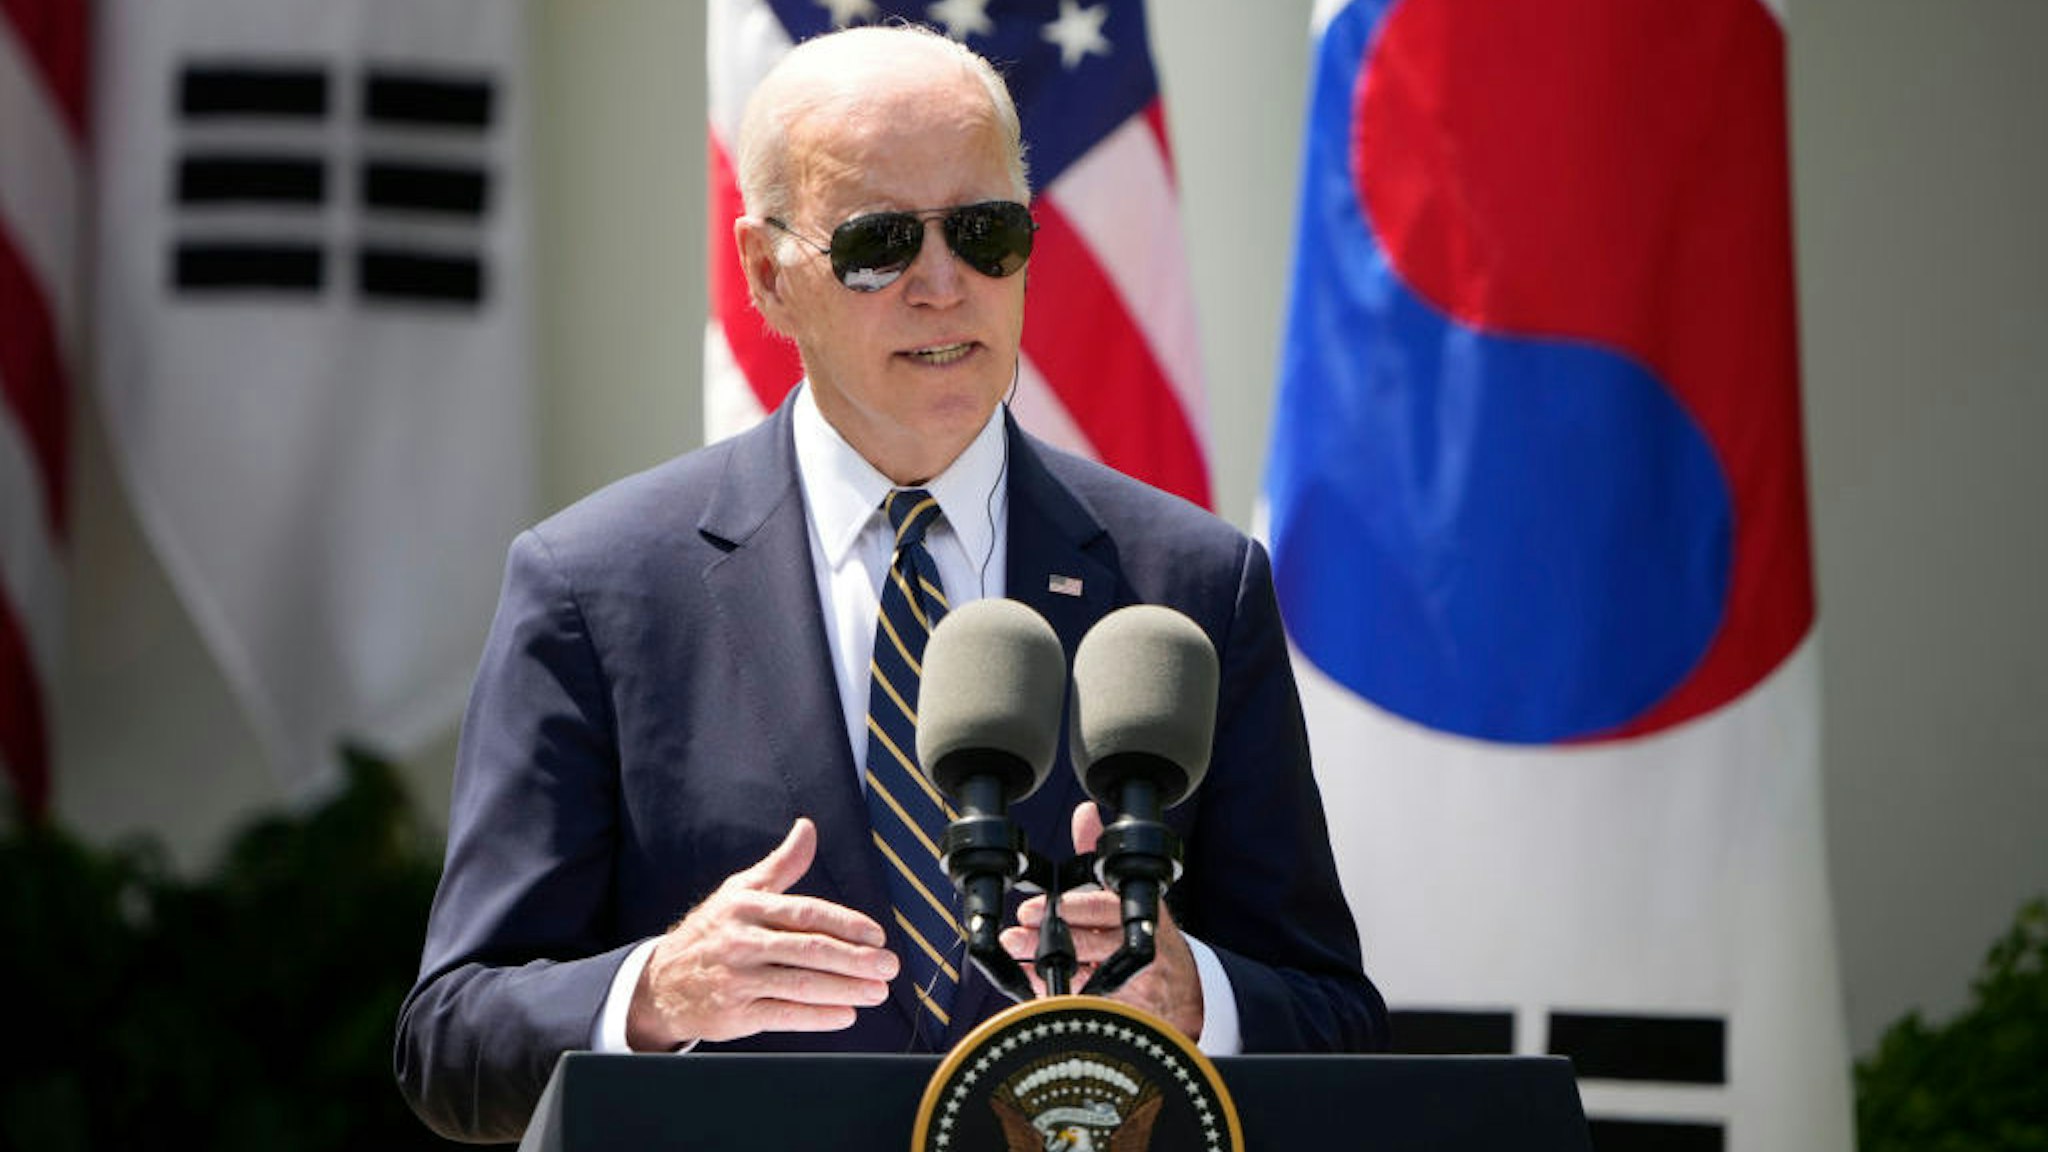 WASHINGTON, DC - APRIL 26: U.S. President Joe Biden delivers remarks during a joint press conference with South Korean President Yoon Suk-yeol in the Rose Garden at the White House, April 26, 2023 in Washington, DC. President Biden is hosting President Yoon on his first visit to the United States as the two nations have reached a nuclear weapons agreement. (Photo by Drew Angerer/Getty Images)